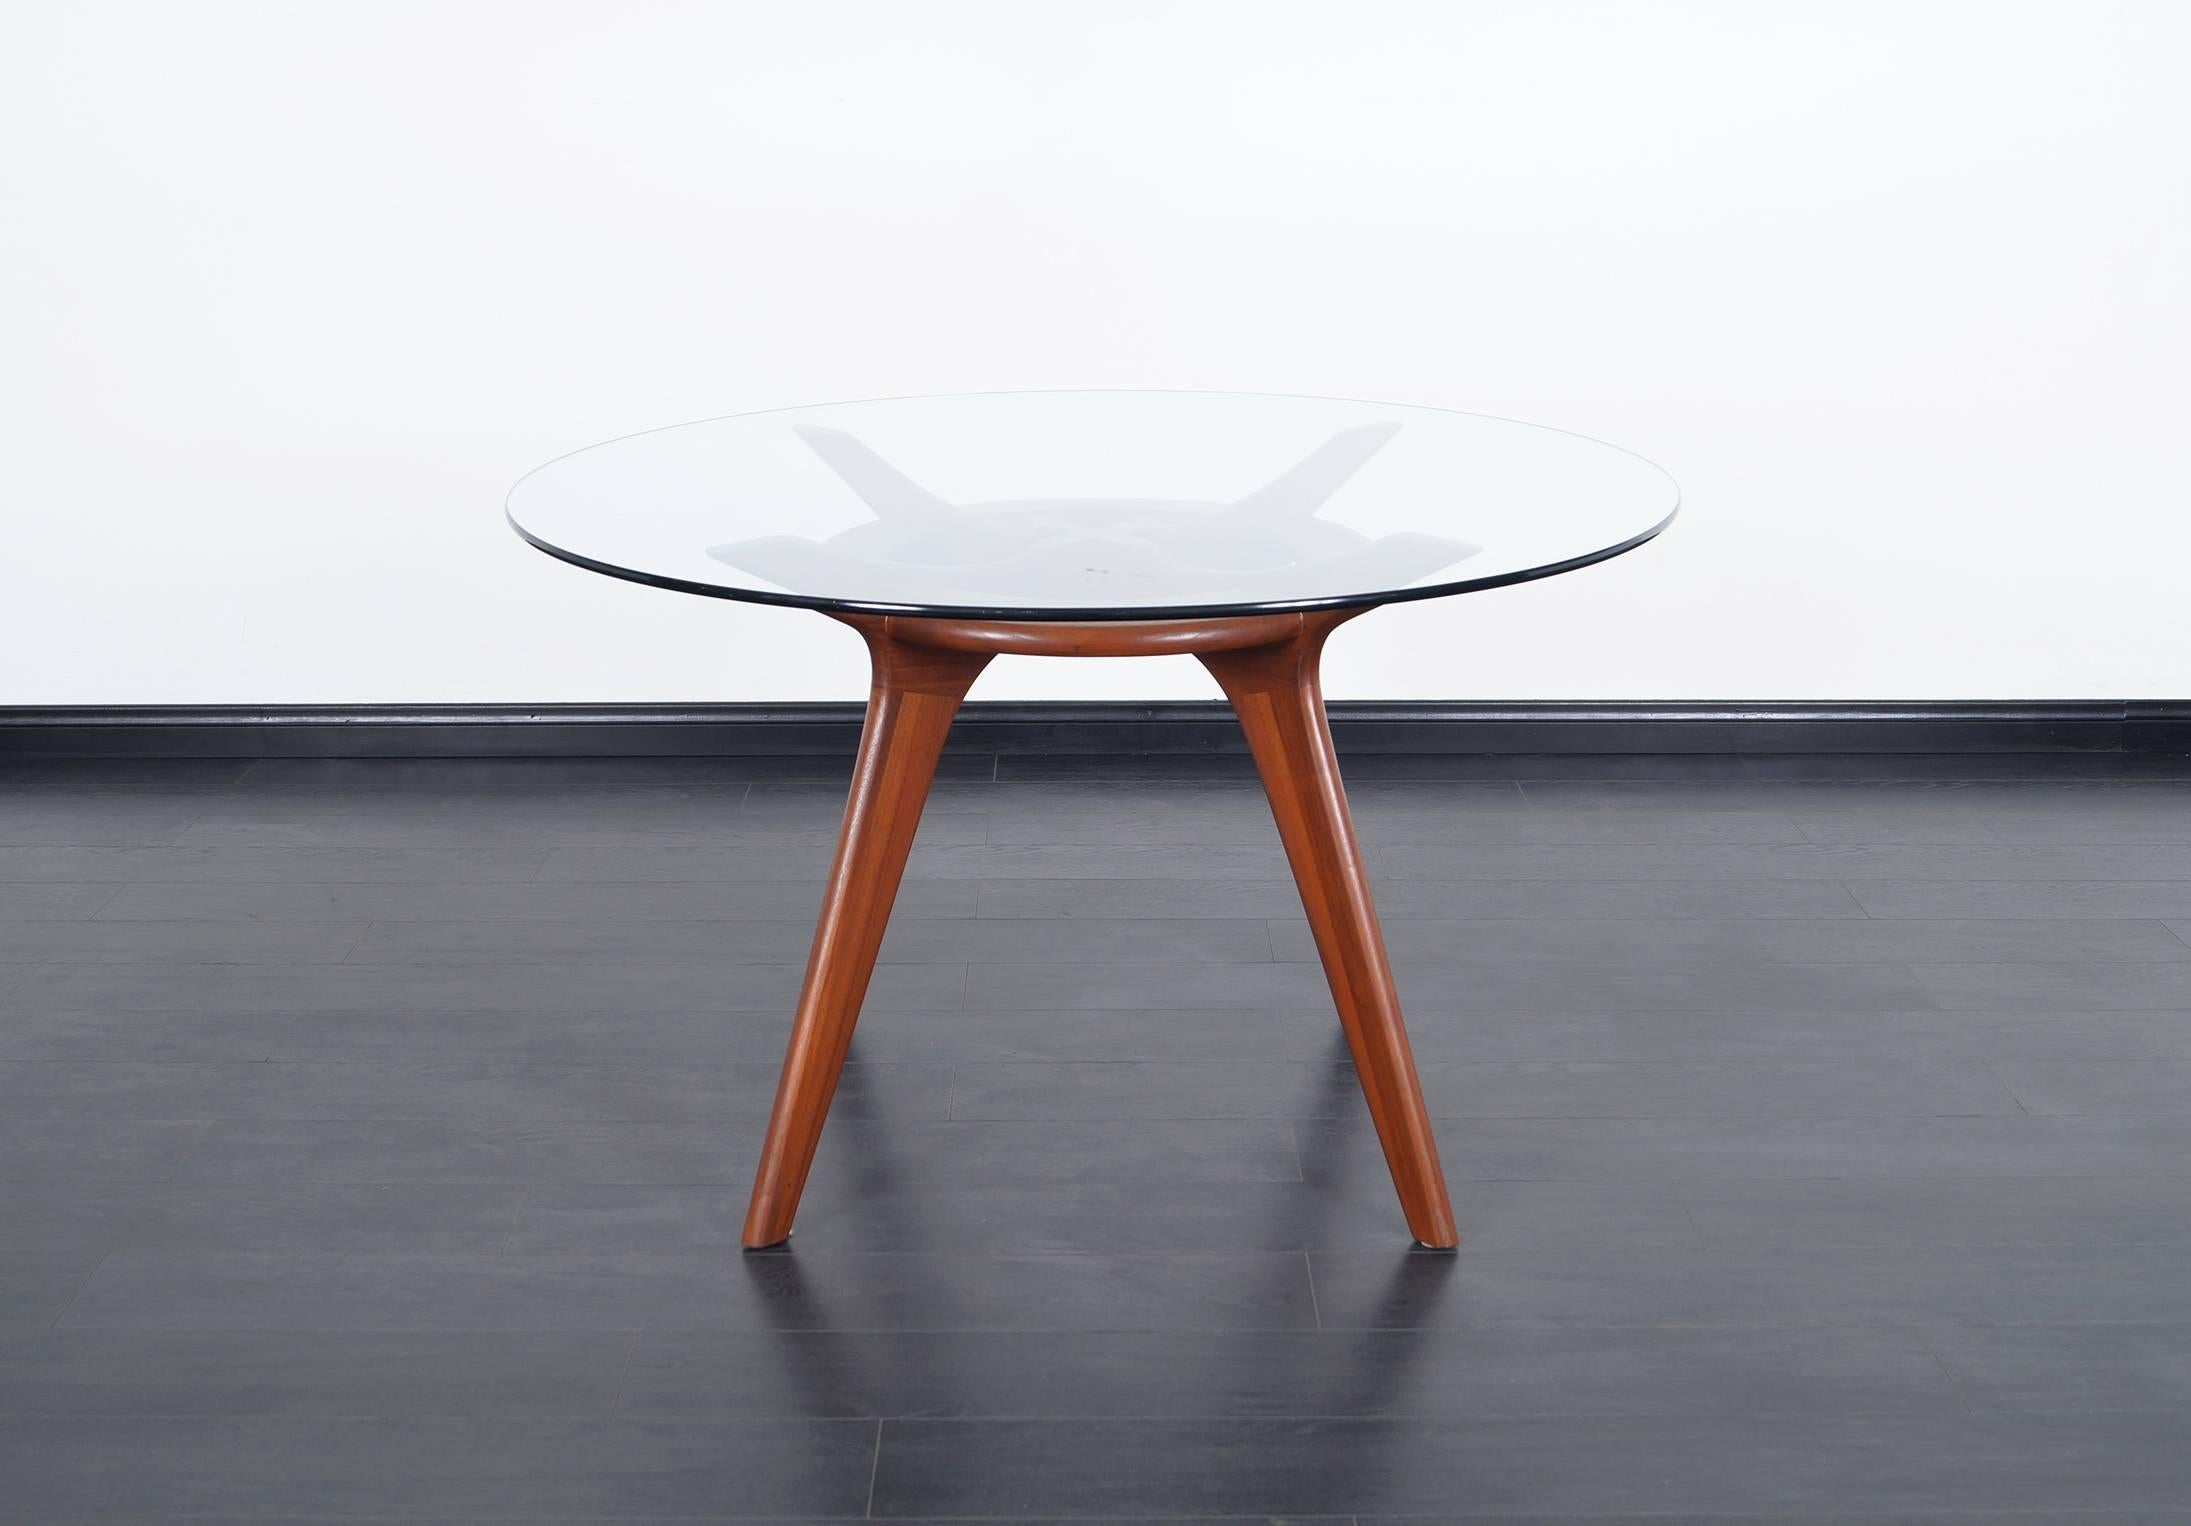 Sculptural walnut dining table designed by Adrian Pearsall for Craft Associates.